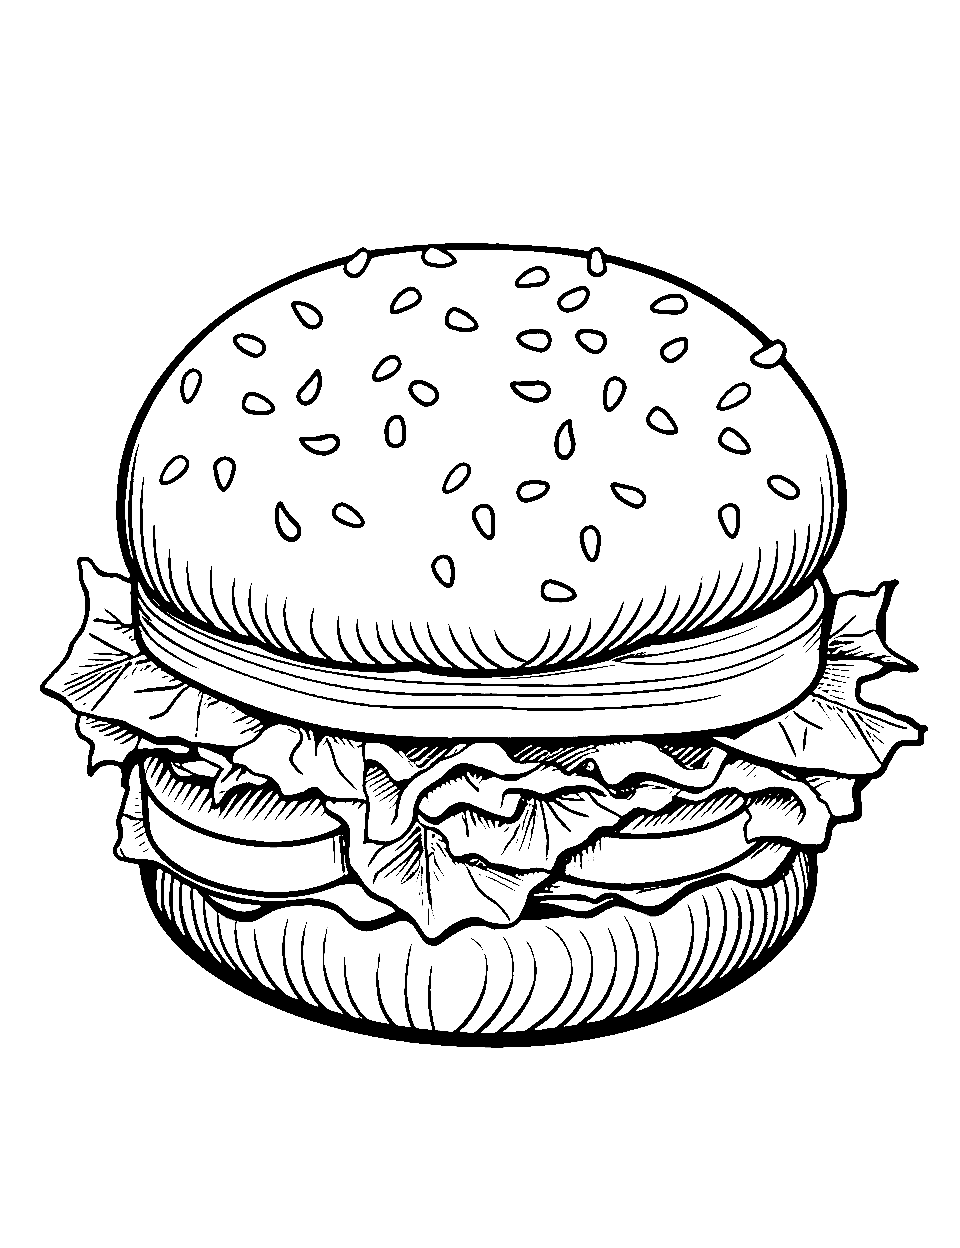 Burger Bash Food Coloring Page - A juicy burger with lettuce, tomato, and cheese dripping.